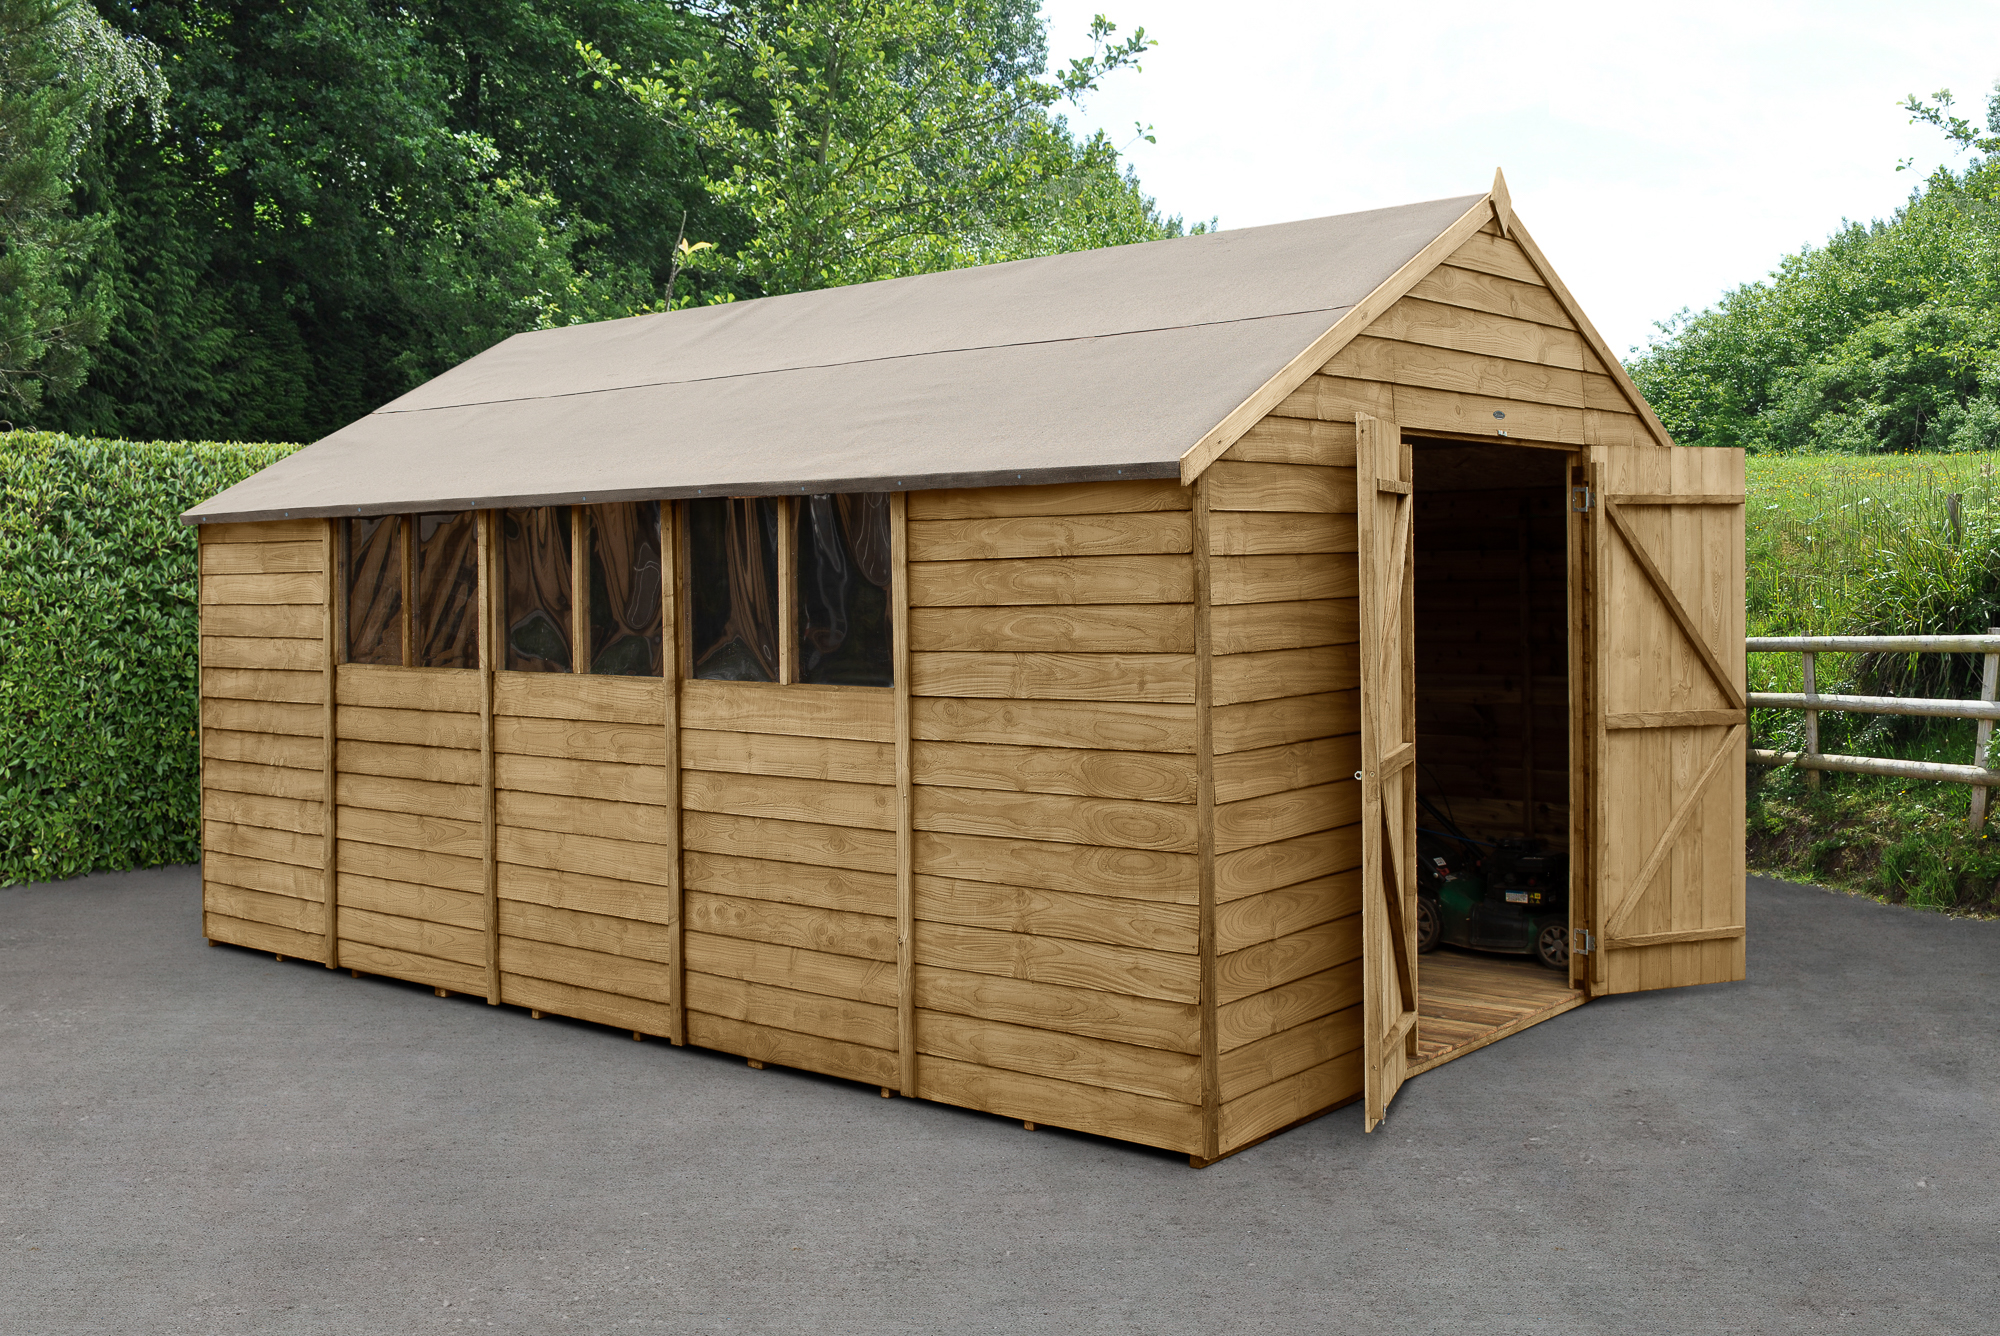 Forest Garden 10 x 15ft 4Life Apex Overlap Pressure Treated Double Door Shed with Base